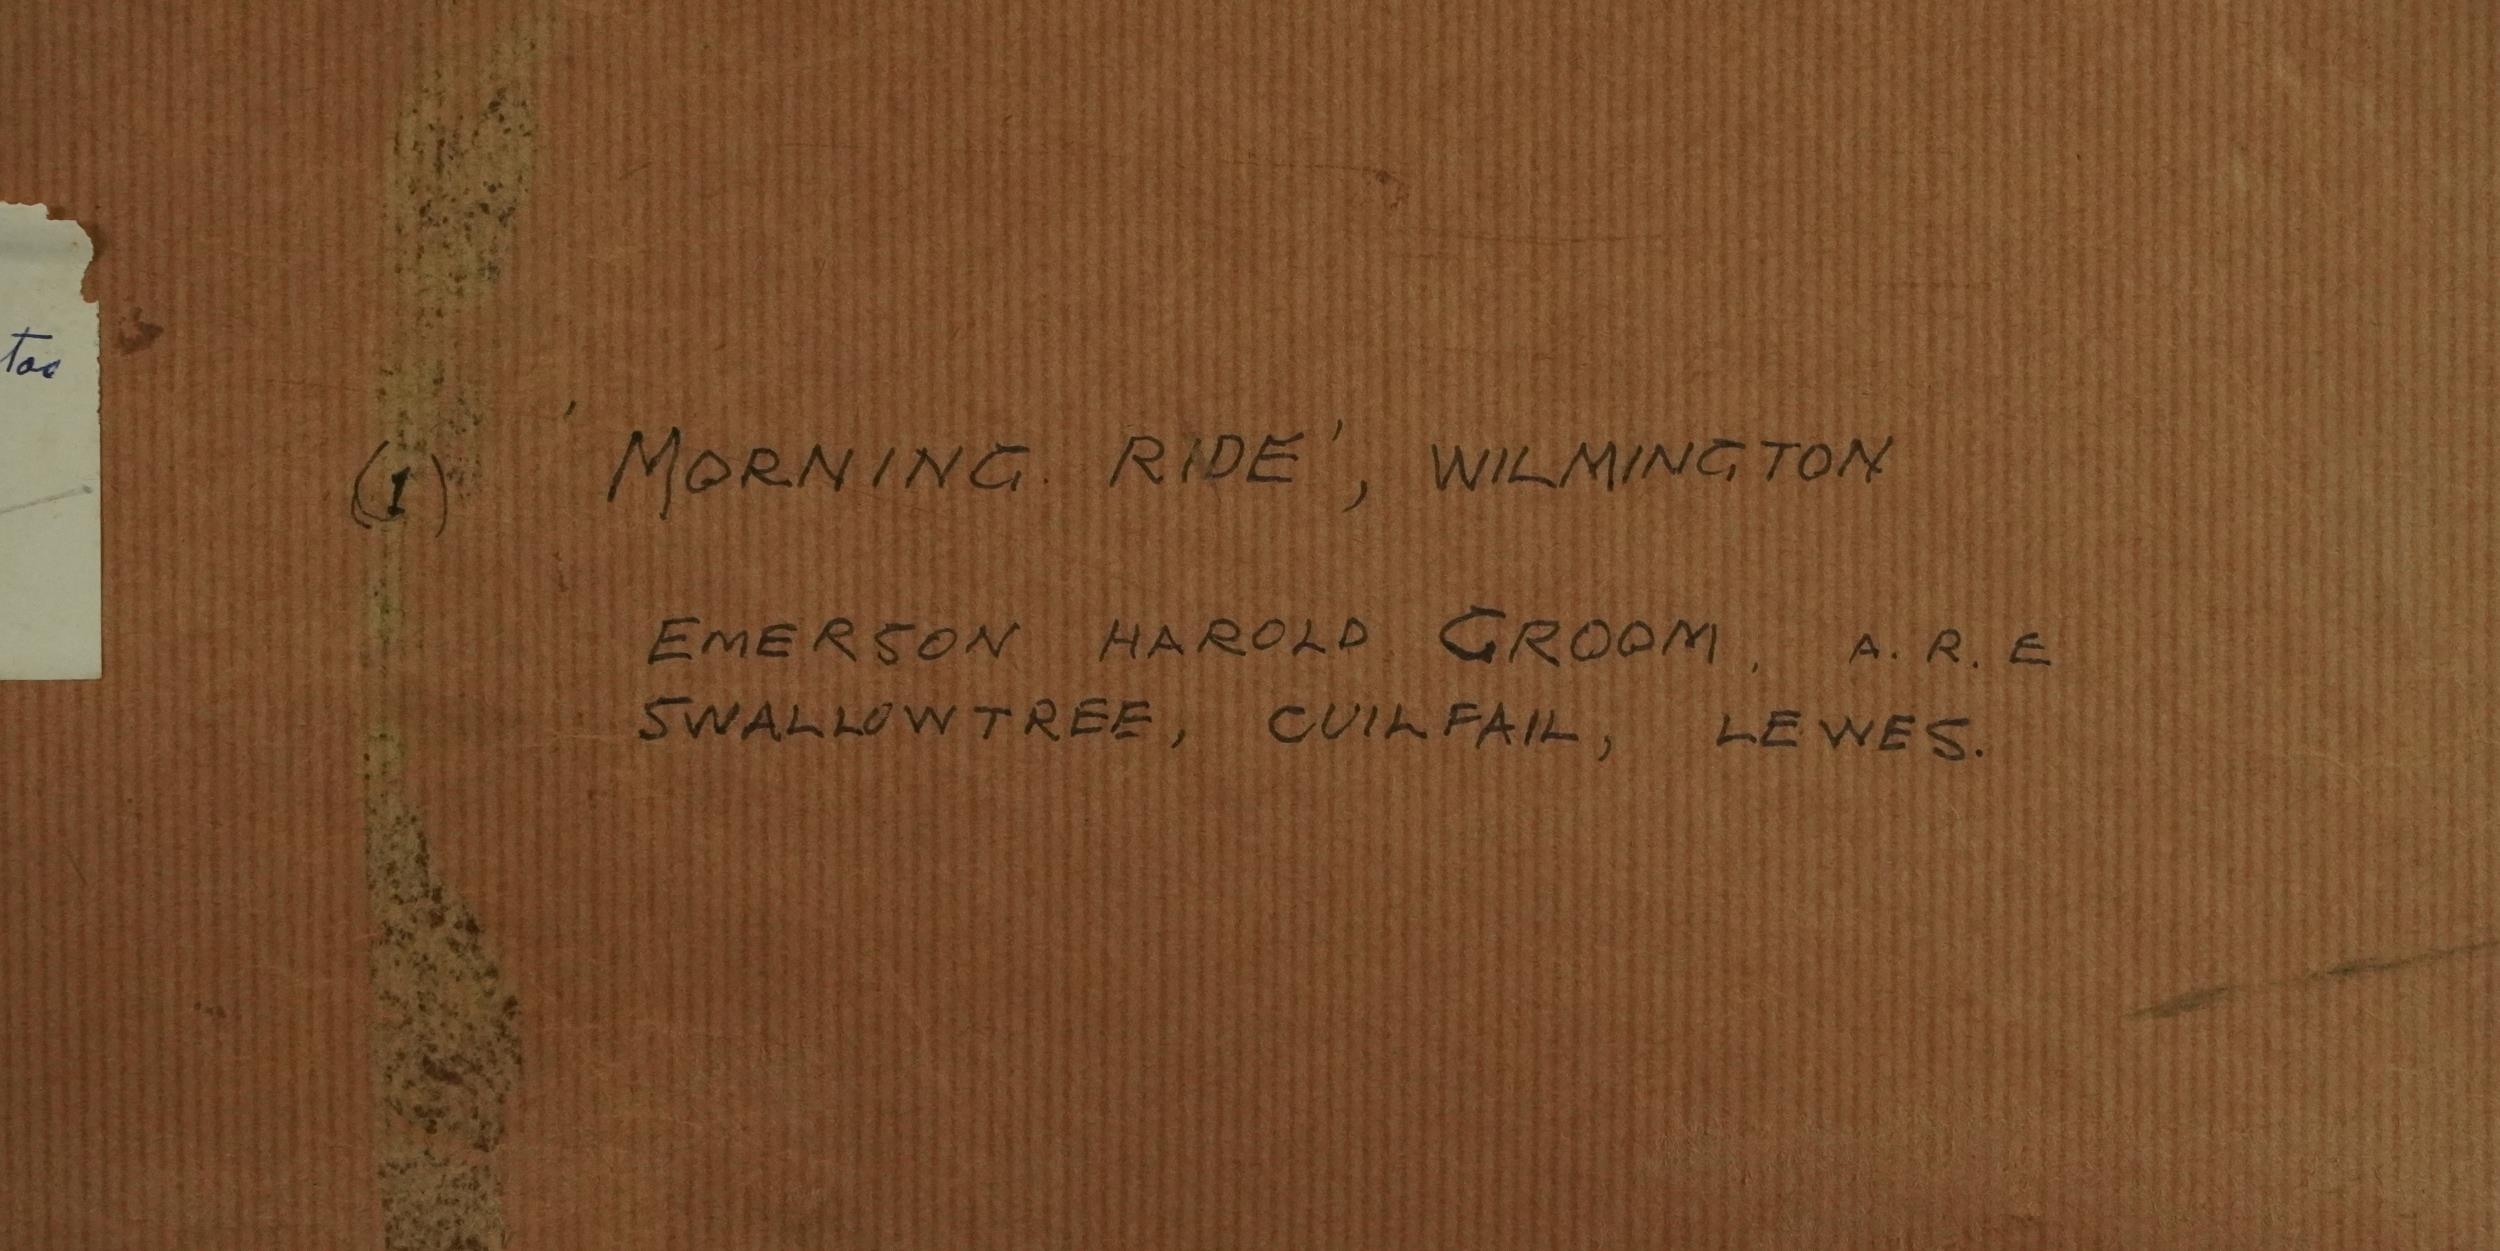 Emerson Harold Groom - Morning Ride Wilmington, watercolour, label verso, mounted, framed and - Image 5 of 6